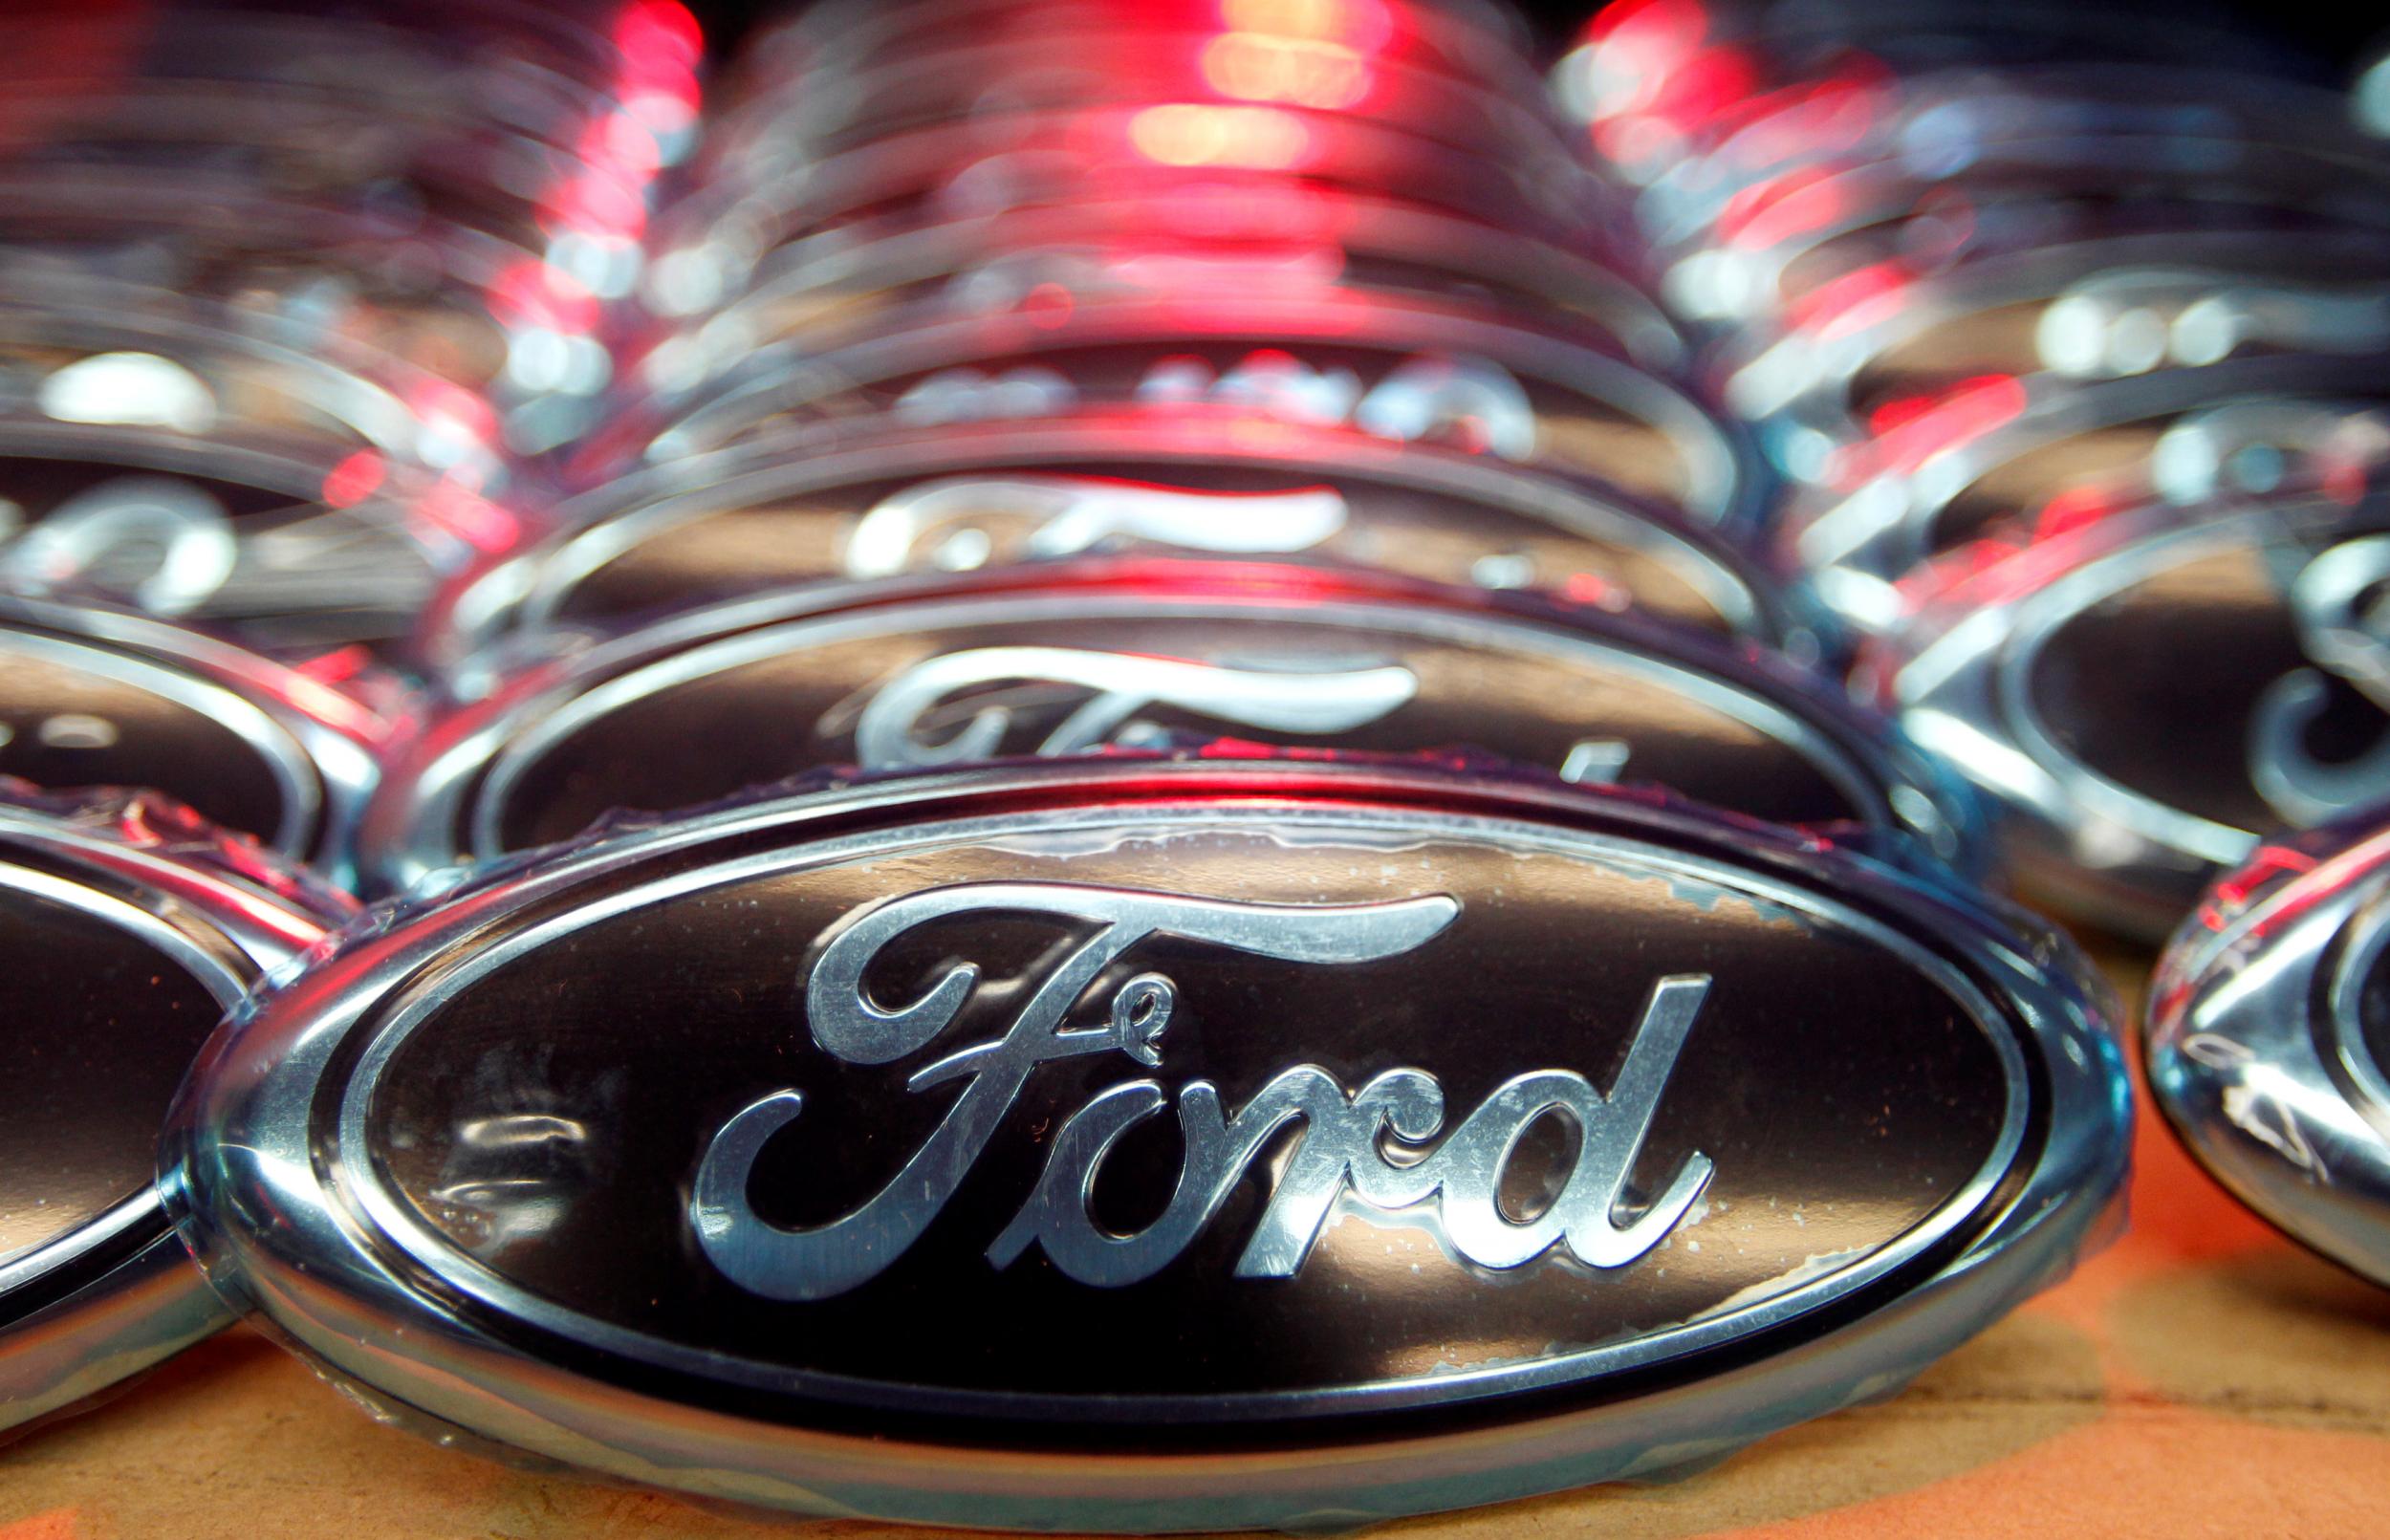 Ford’s China sales have been sluggish in recent months in part because it has failed to catch on to rapidly changing trends